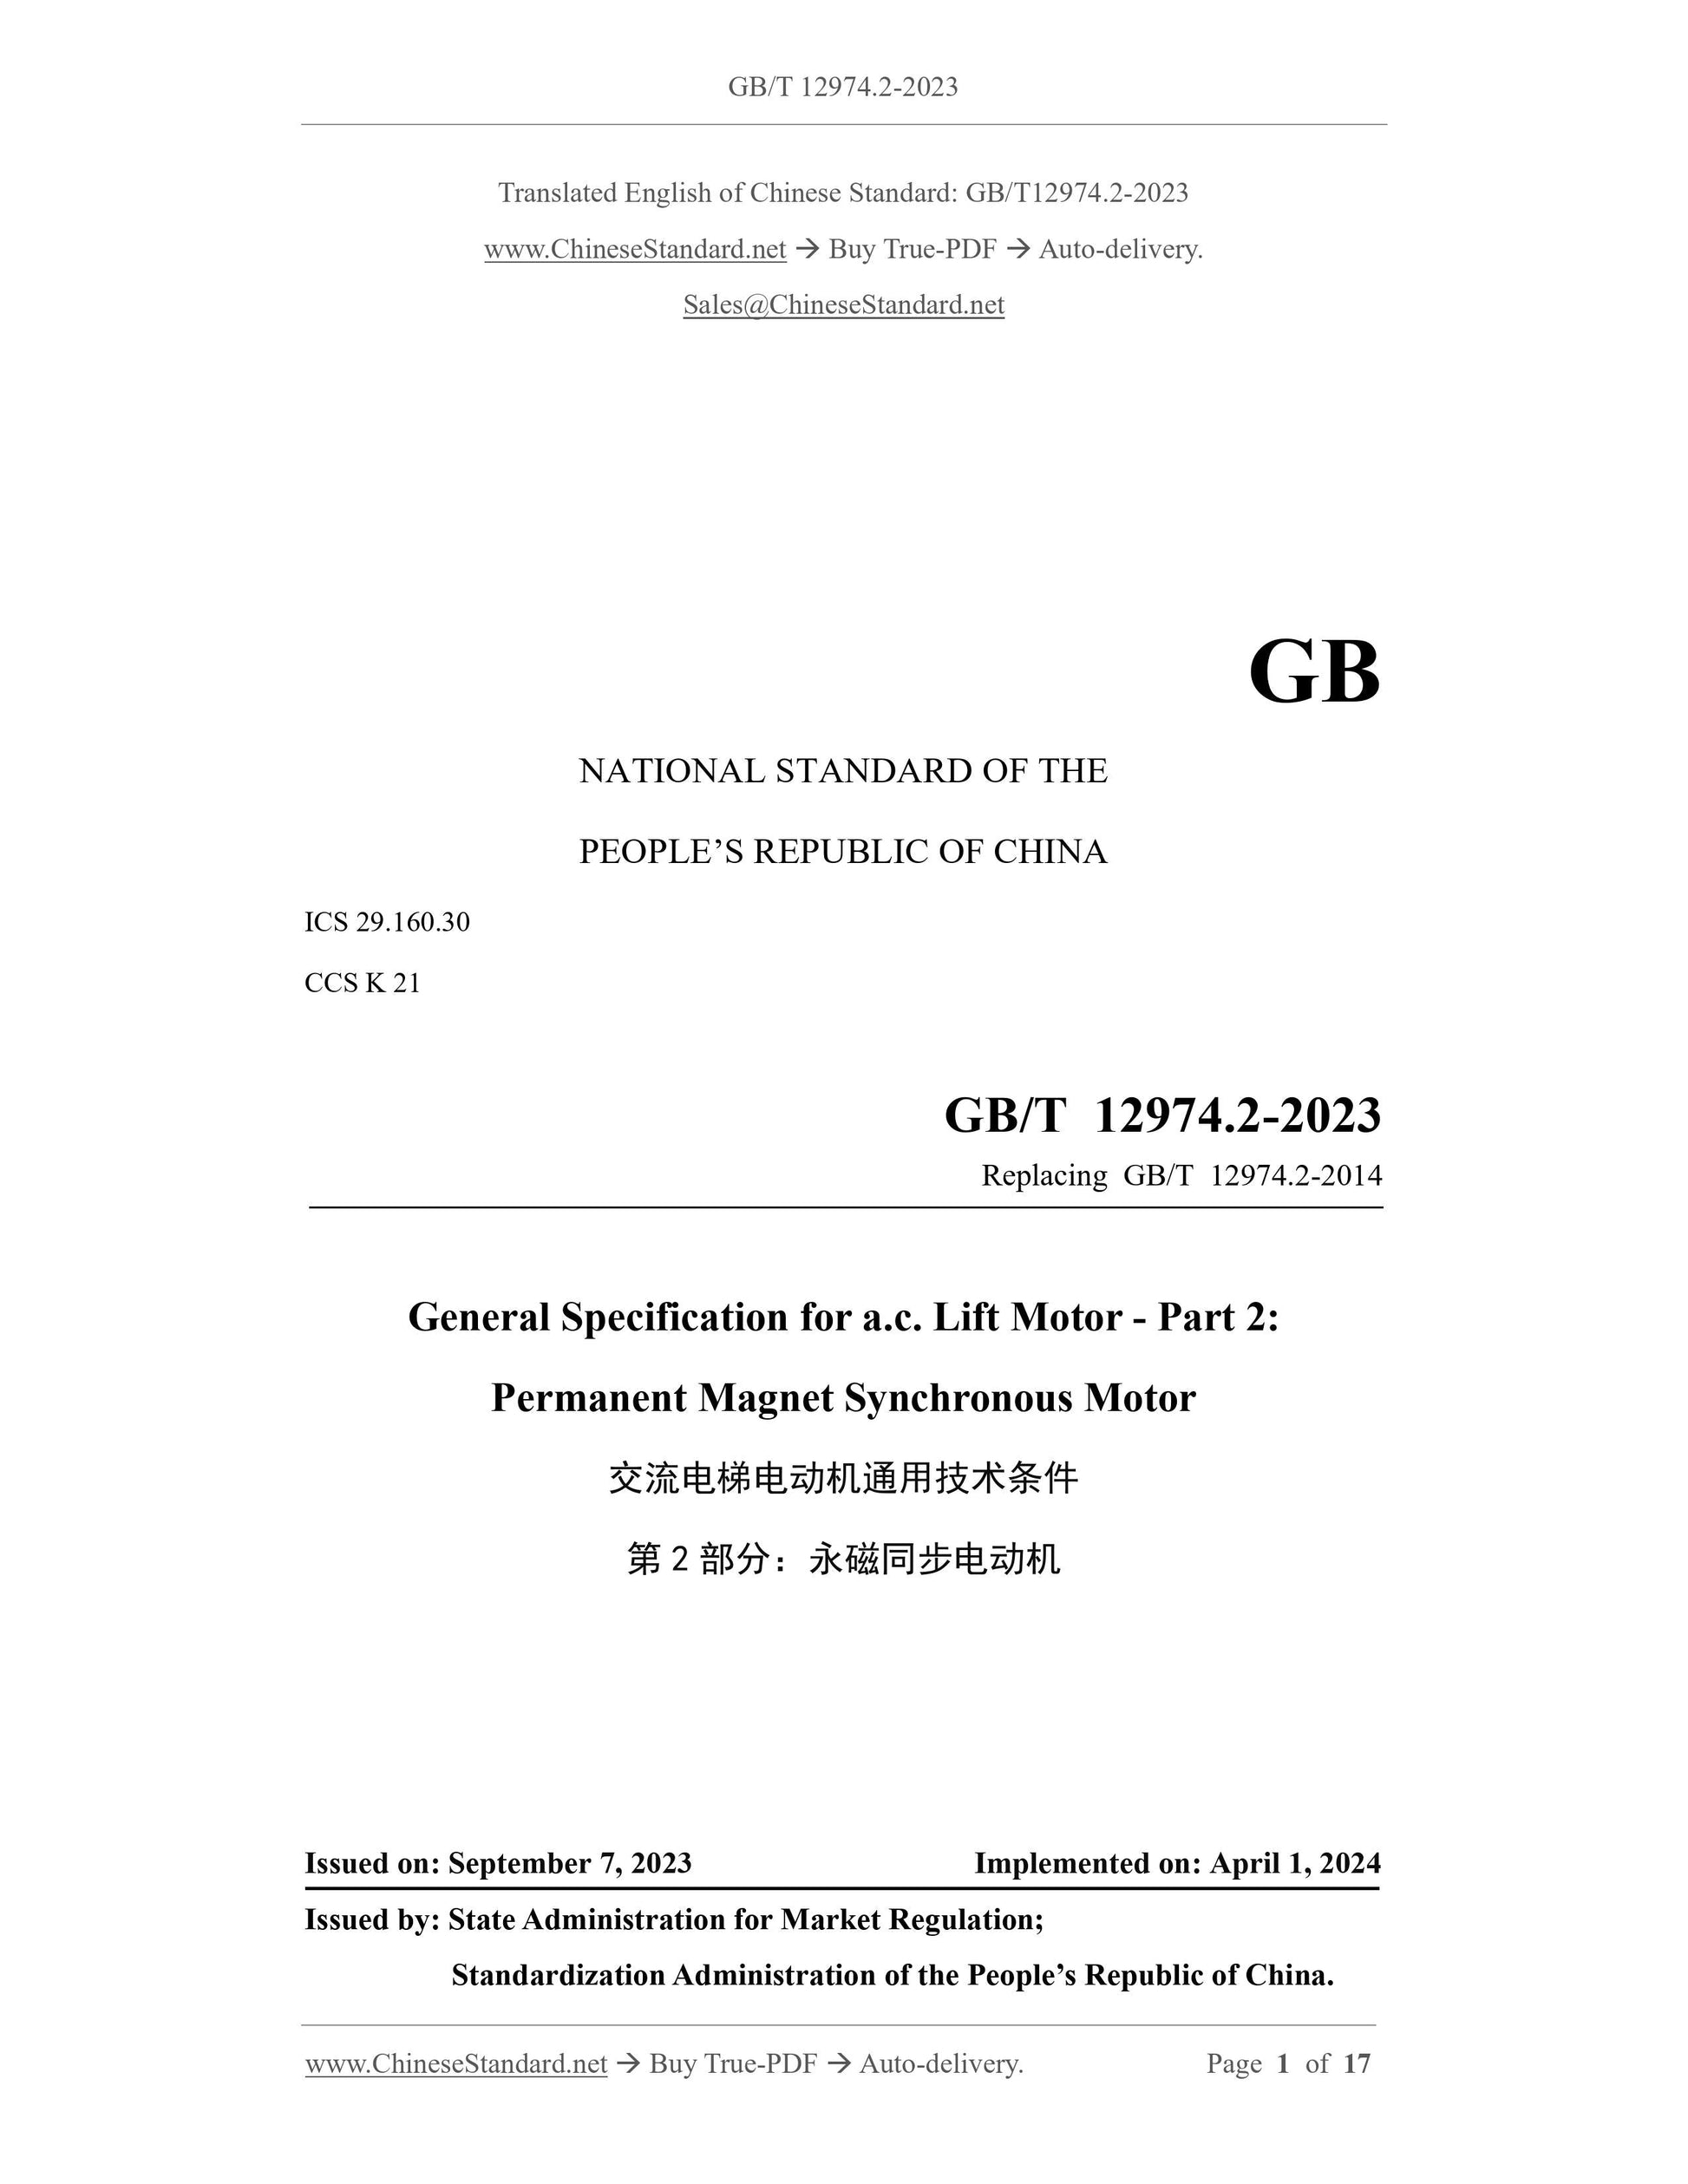 GB/T 12974.2-2023 Page 1